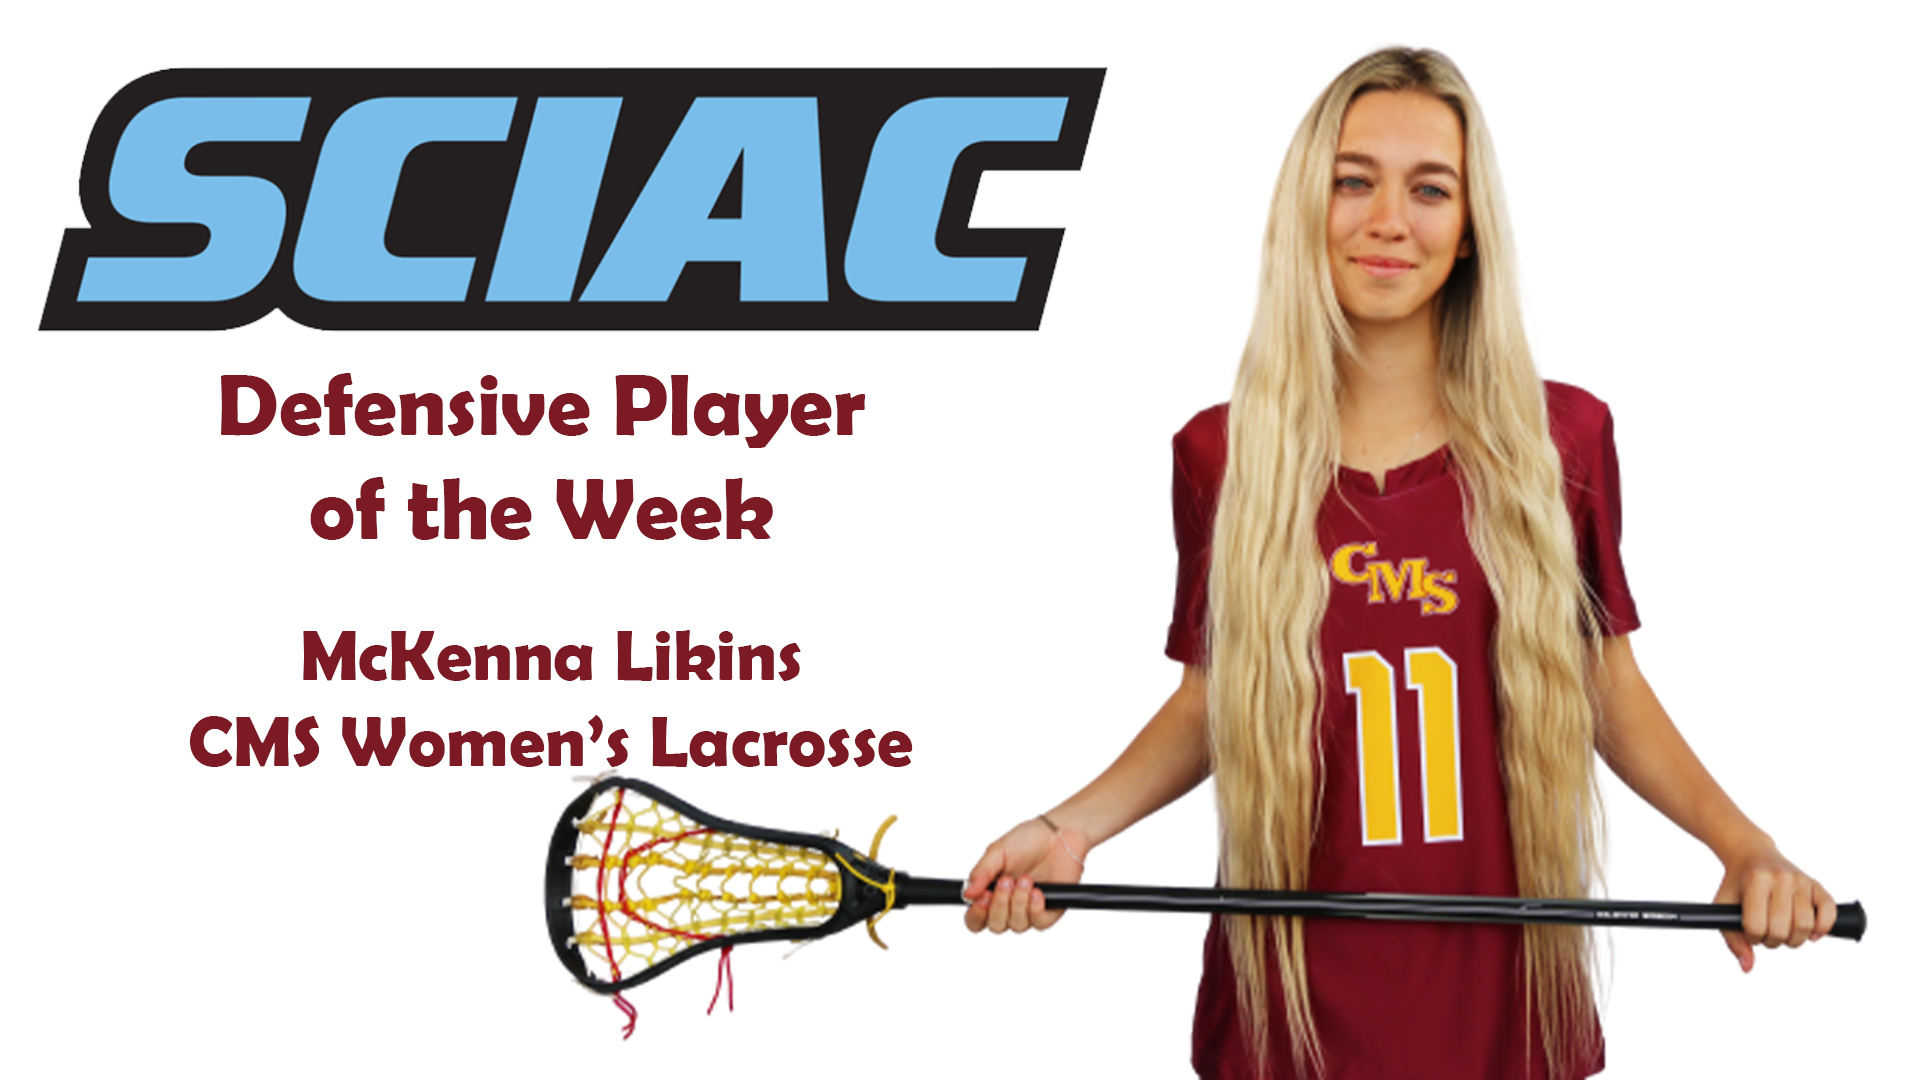 Posed picture of McKenna Likins with the SCIAC logo